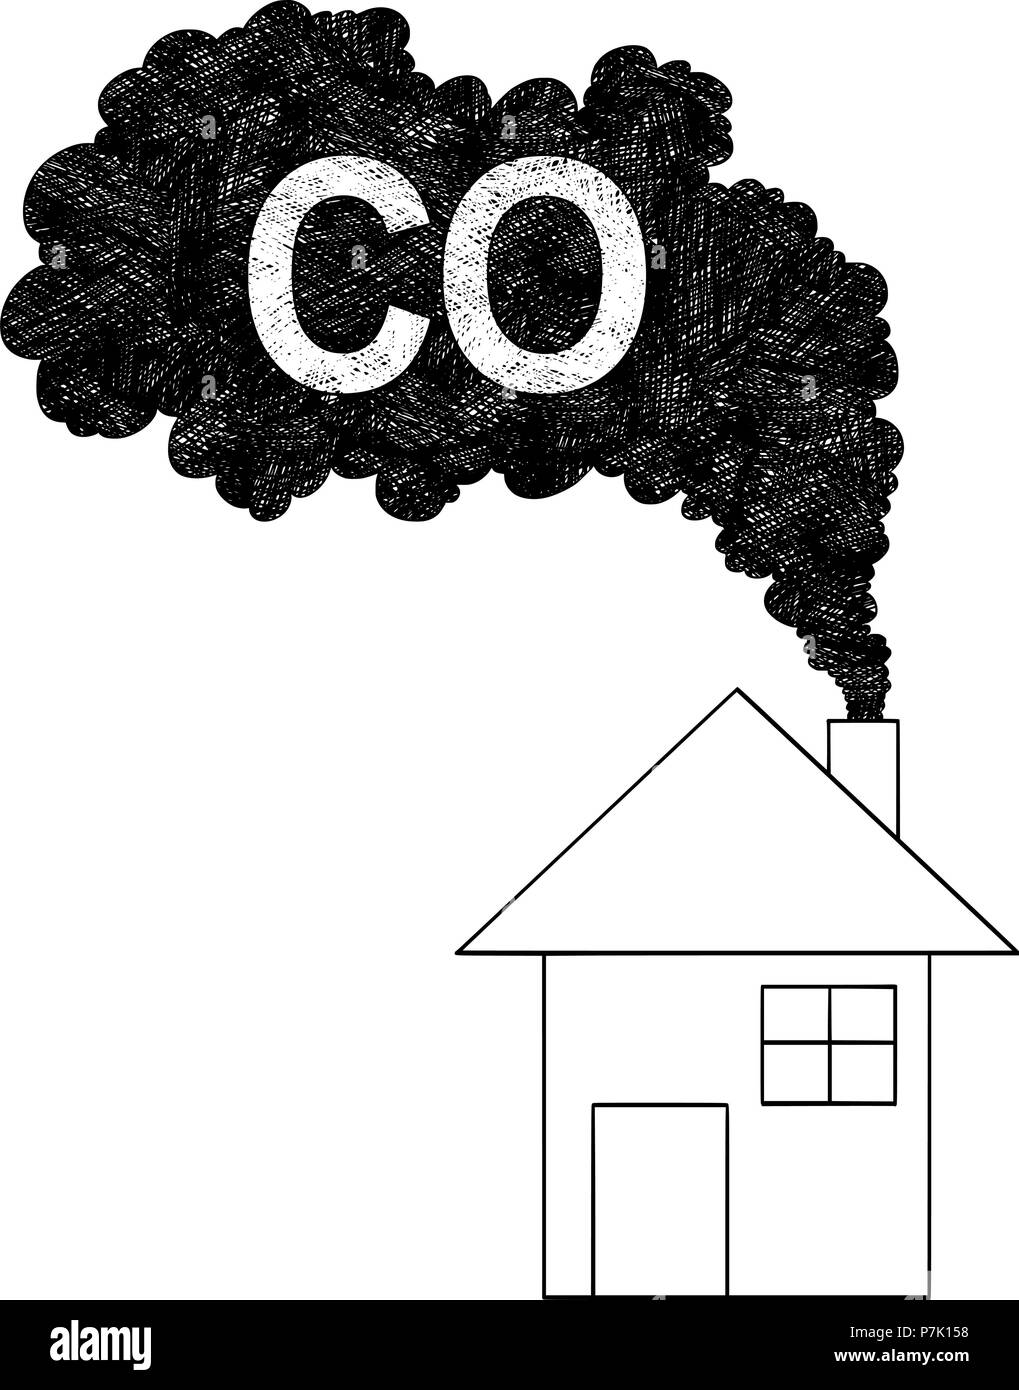 Vector Artistic Drawing Illustration of Smoke Coming from House Chimney, Carbon Monoxide or CO Air Pollution Concept Stock Vector